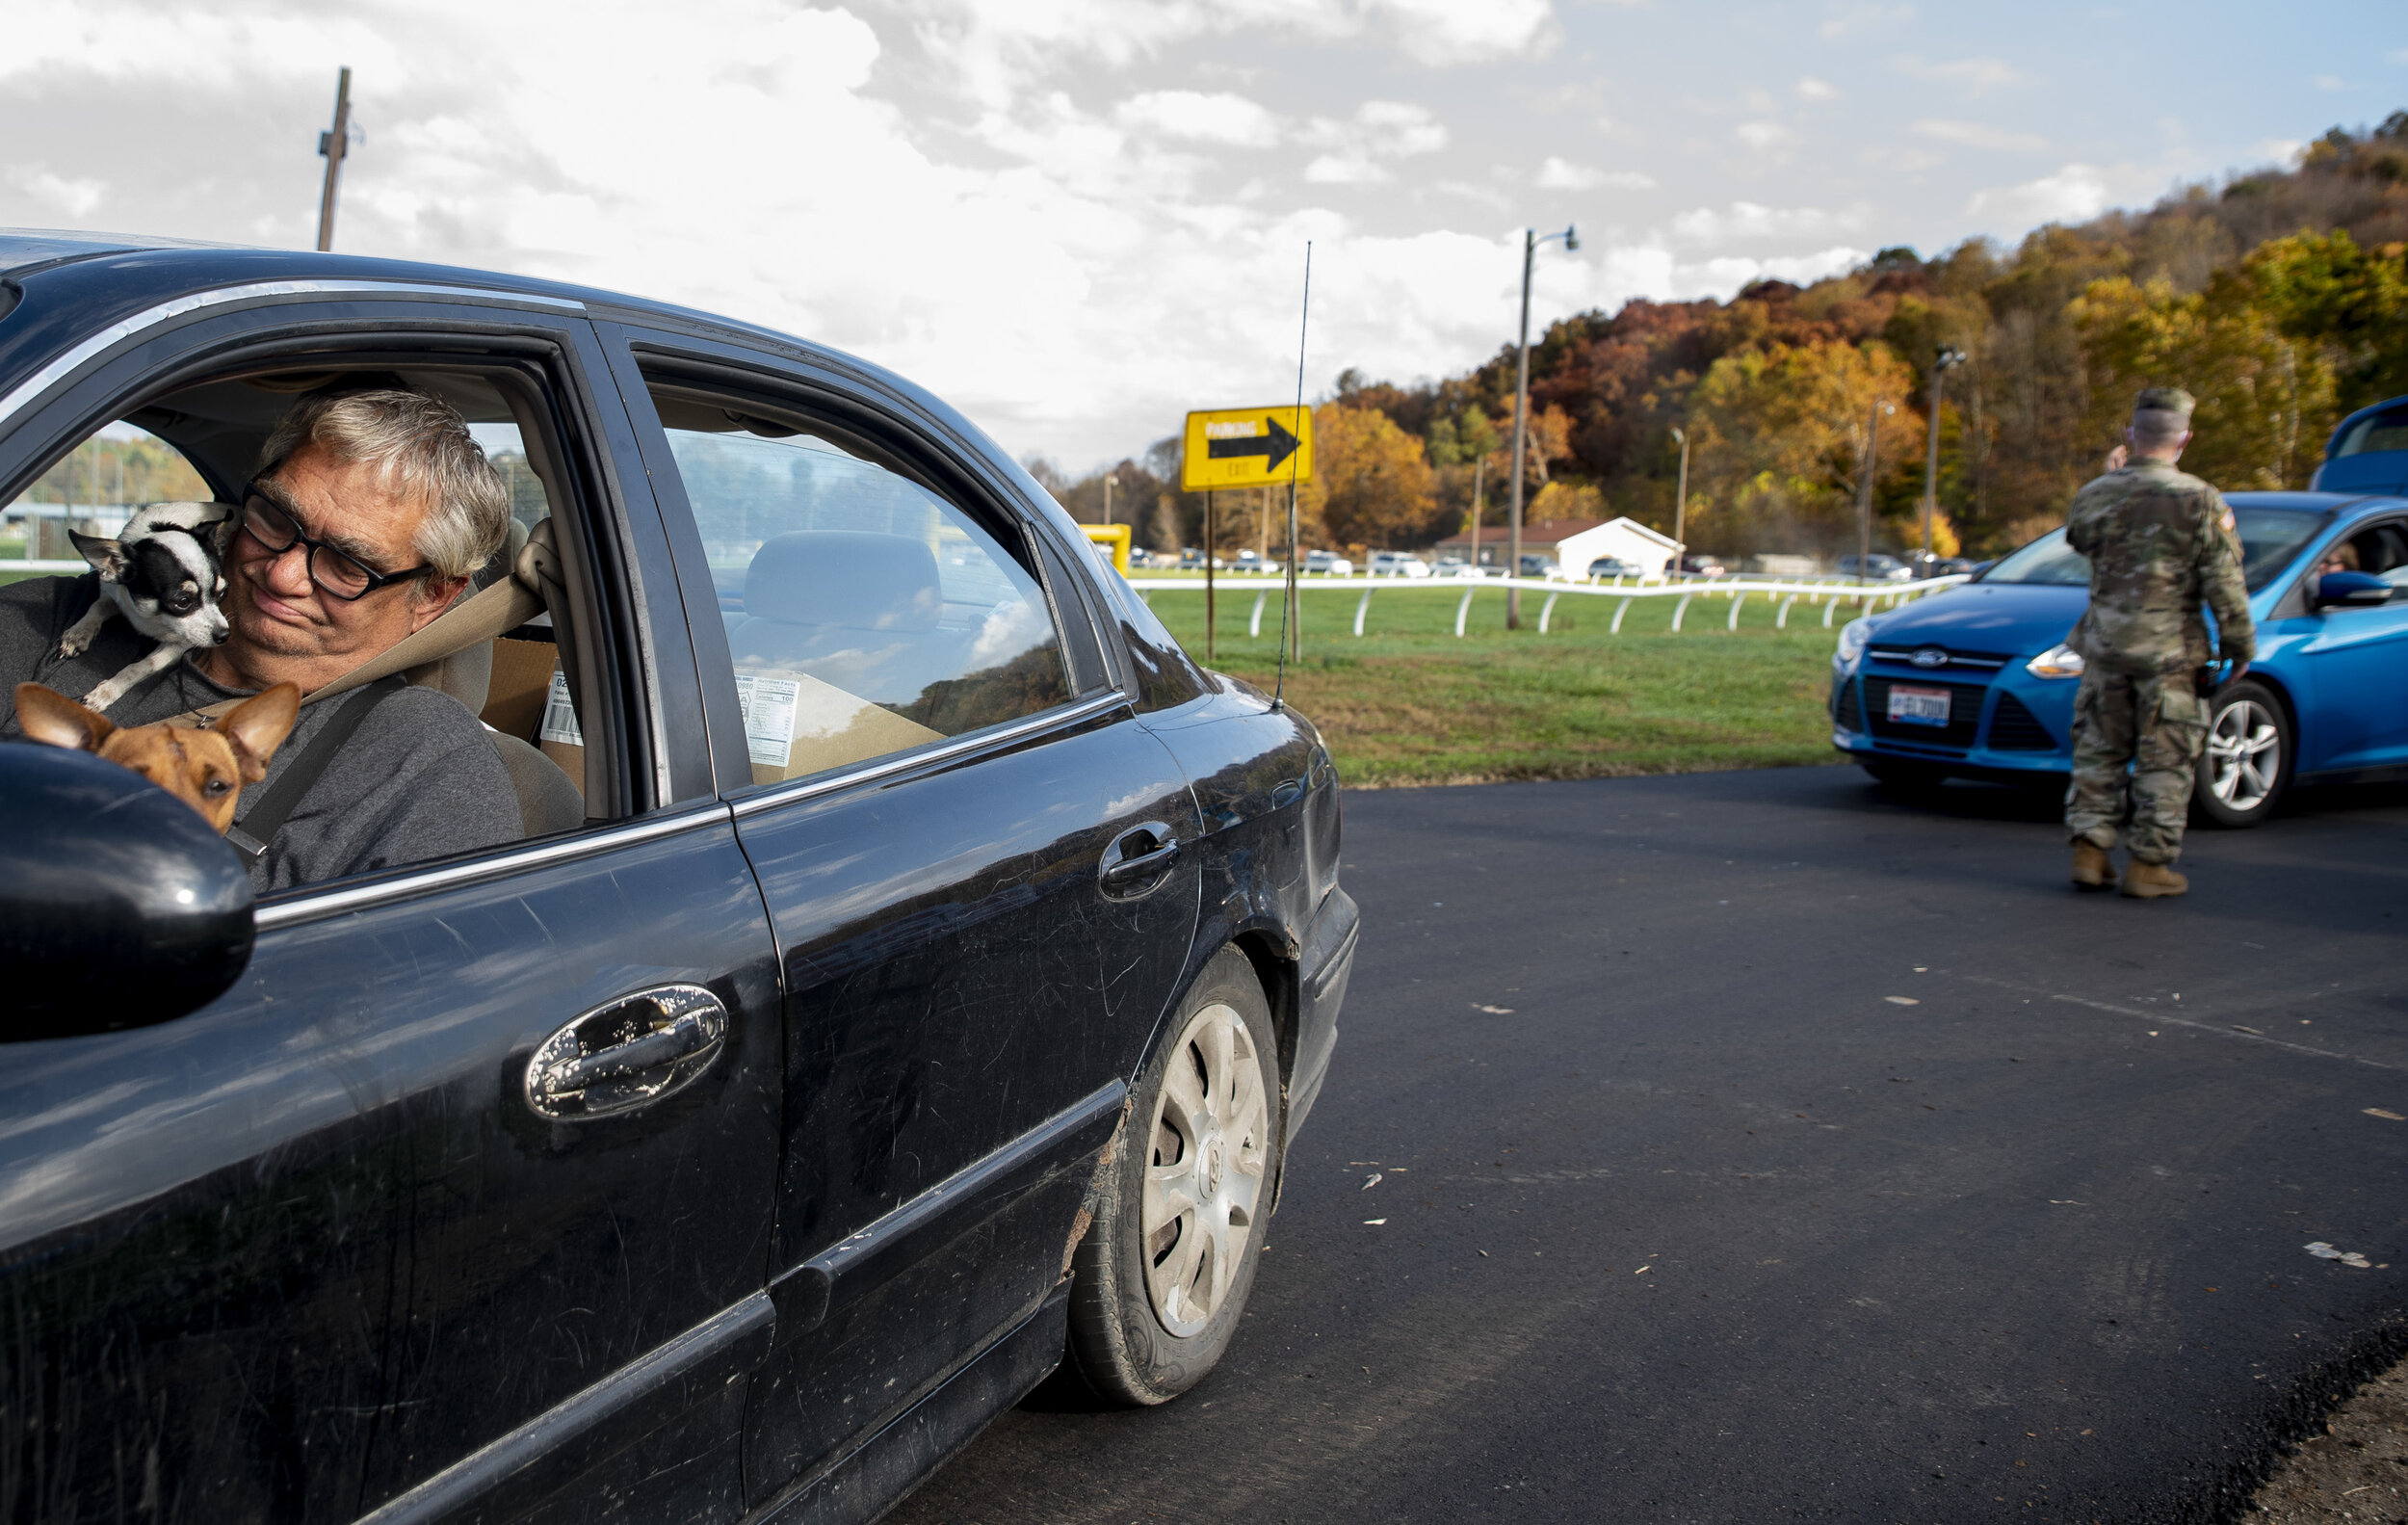  A man stops for a portrait before driving away from the Hocking County Fairgrounds after collecting food during the Southeast Ohio Food Bank’s food distribution day on Oct. 23, 2020 in Logan, Ohio.   